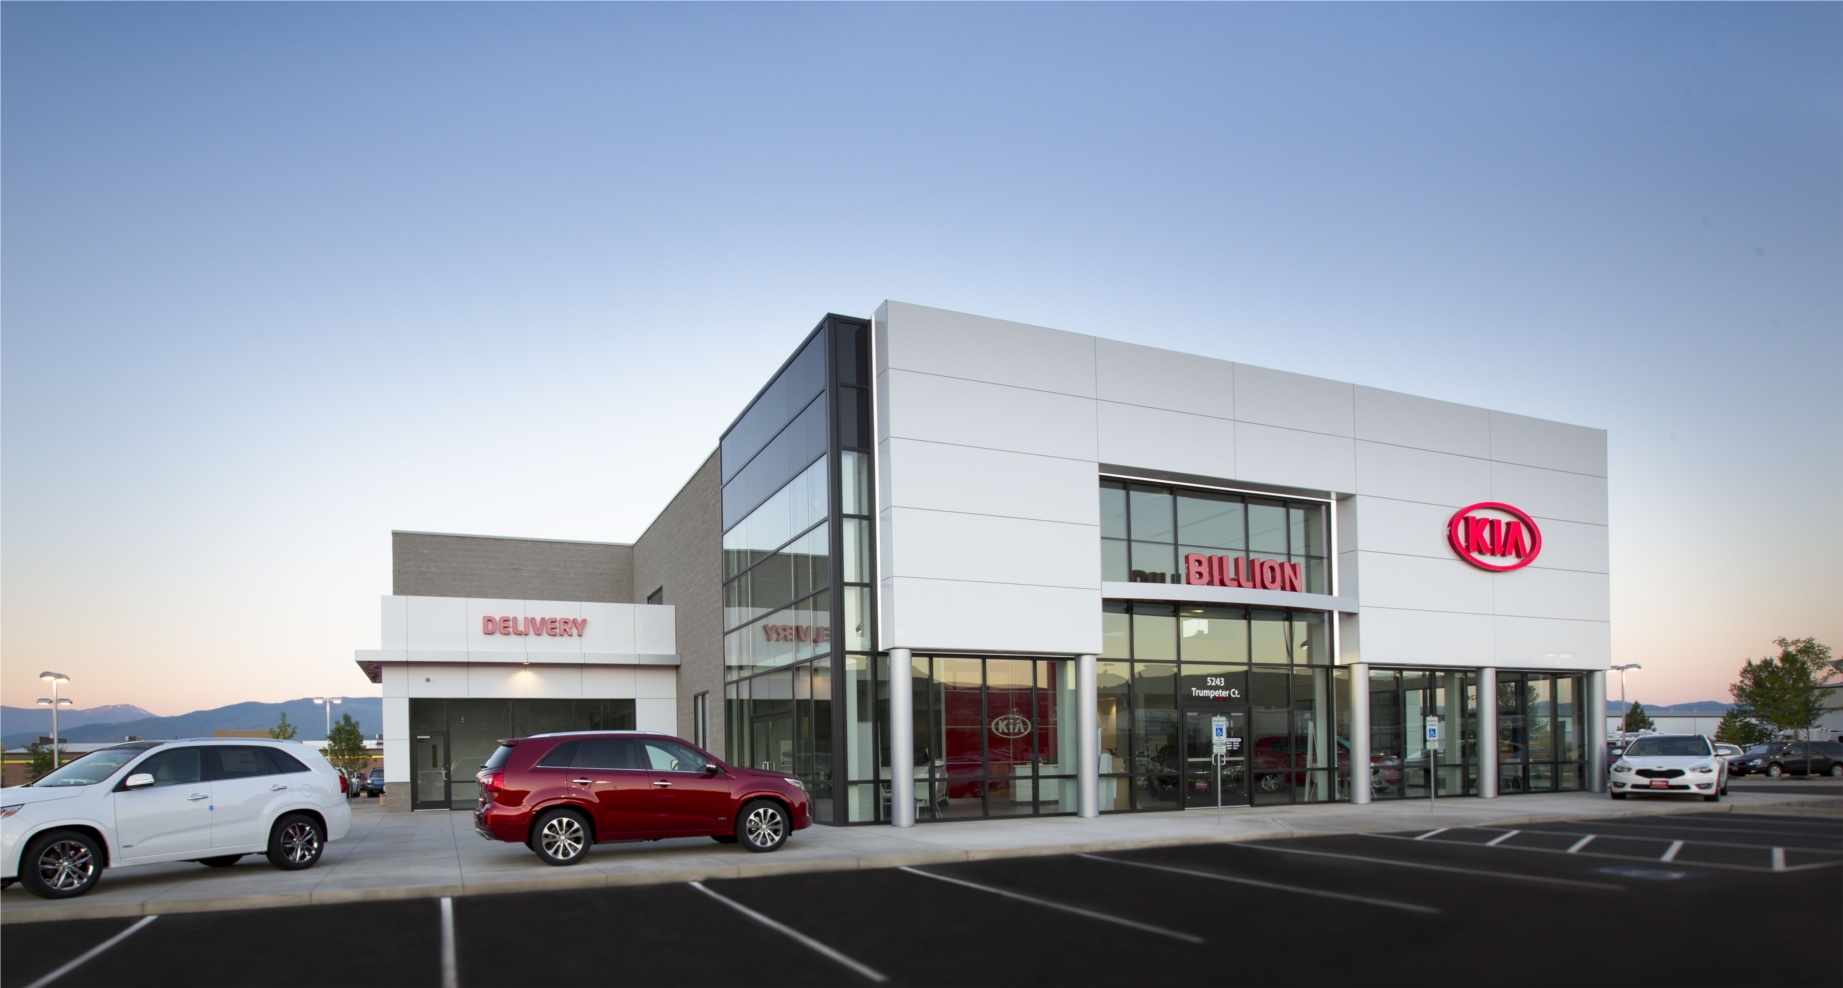 Metal Design Systems Inc. - Completed Kia project - Rapid City, SD